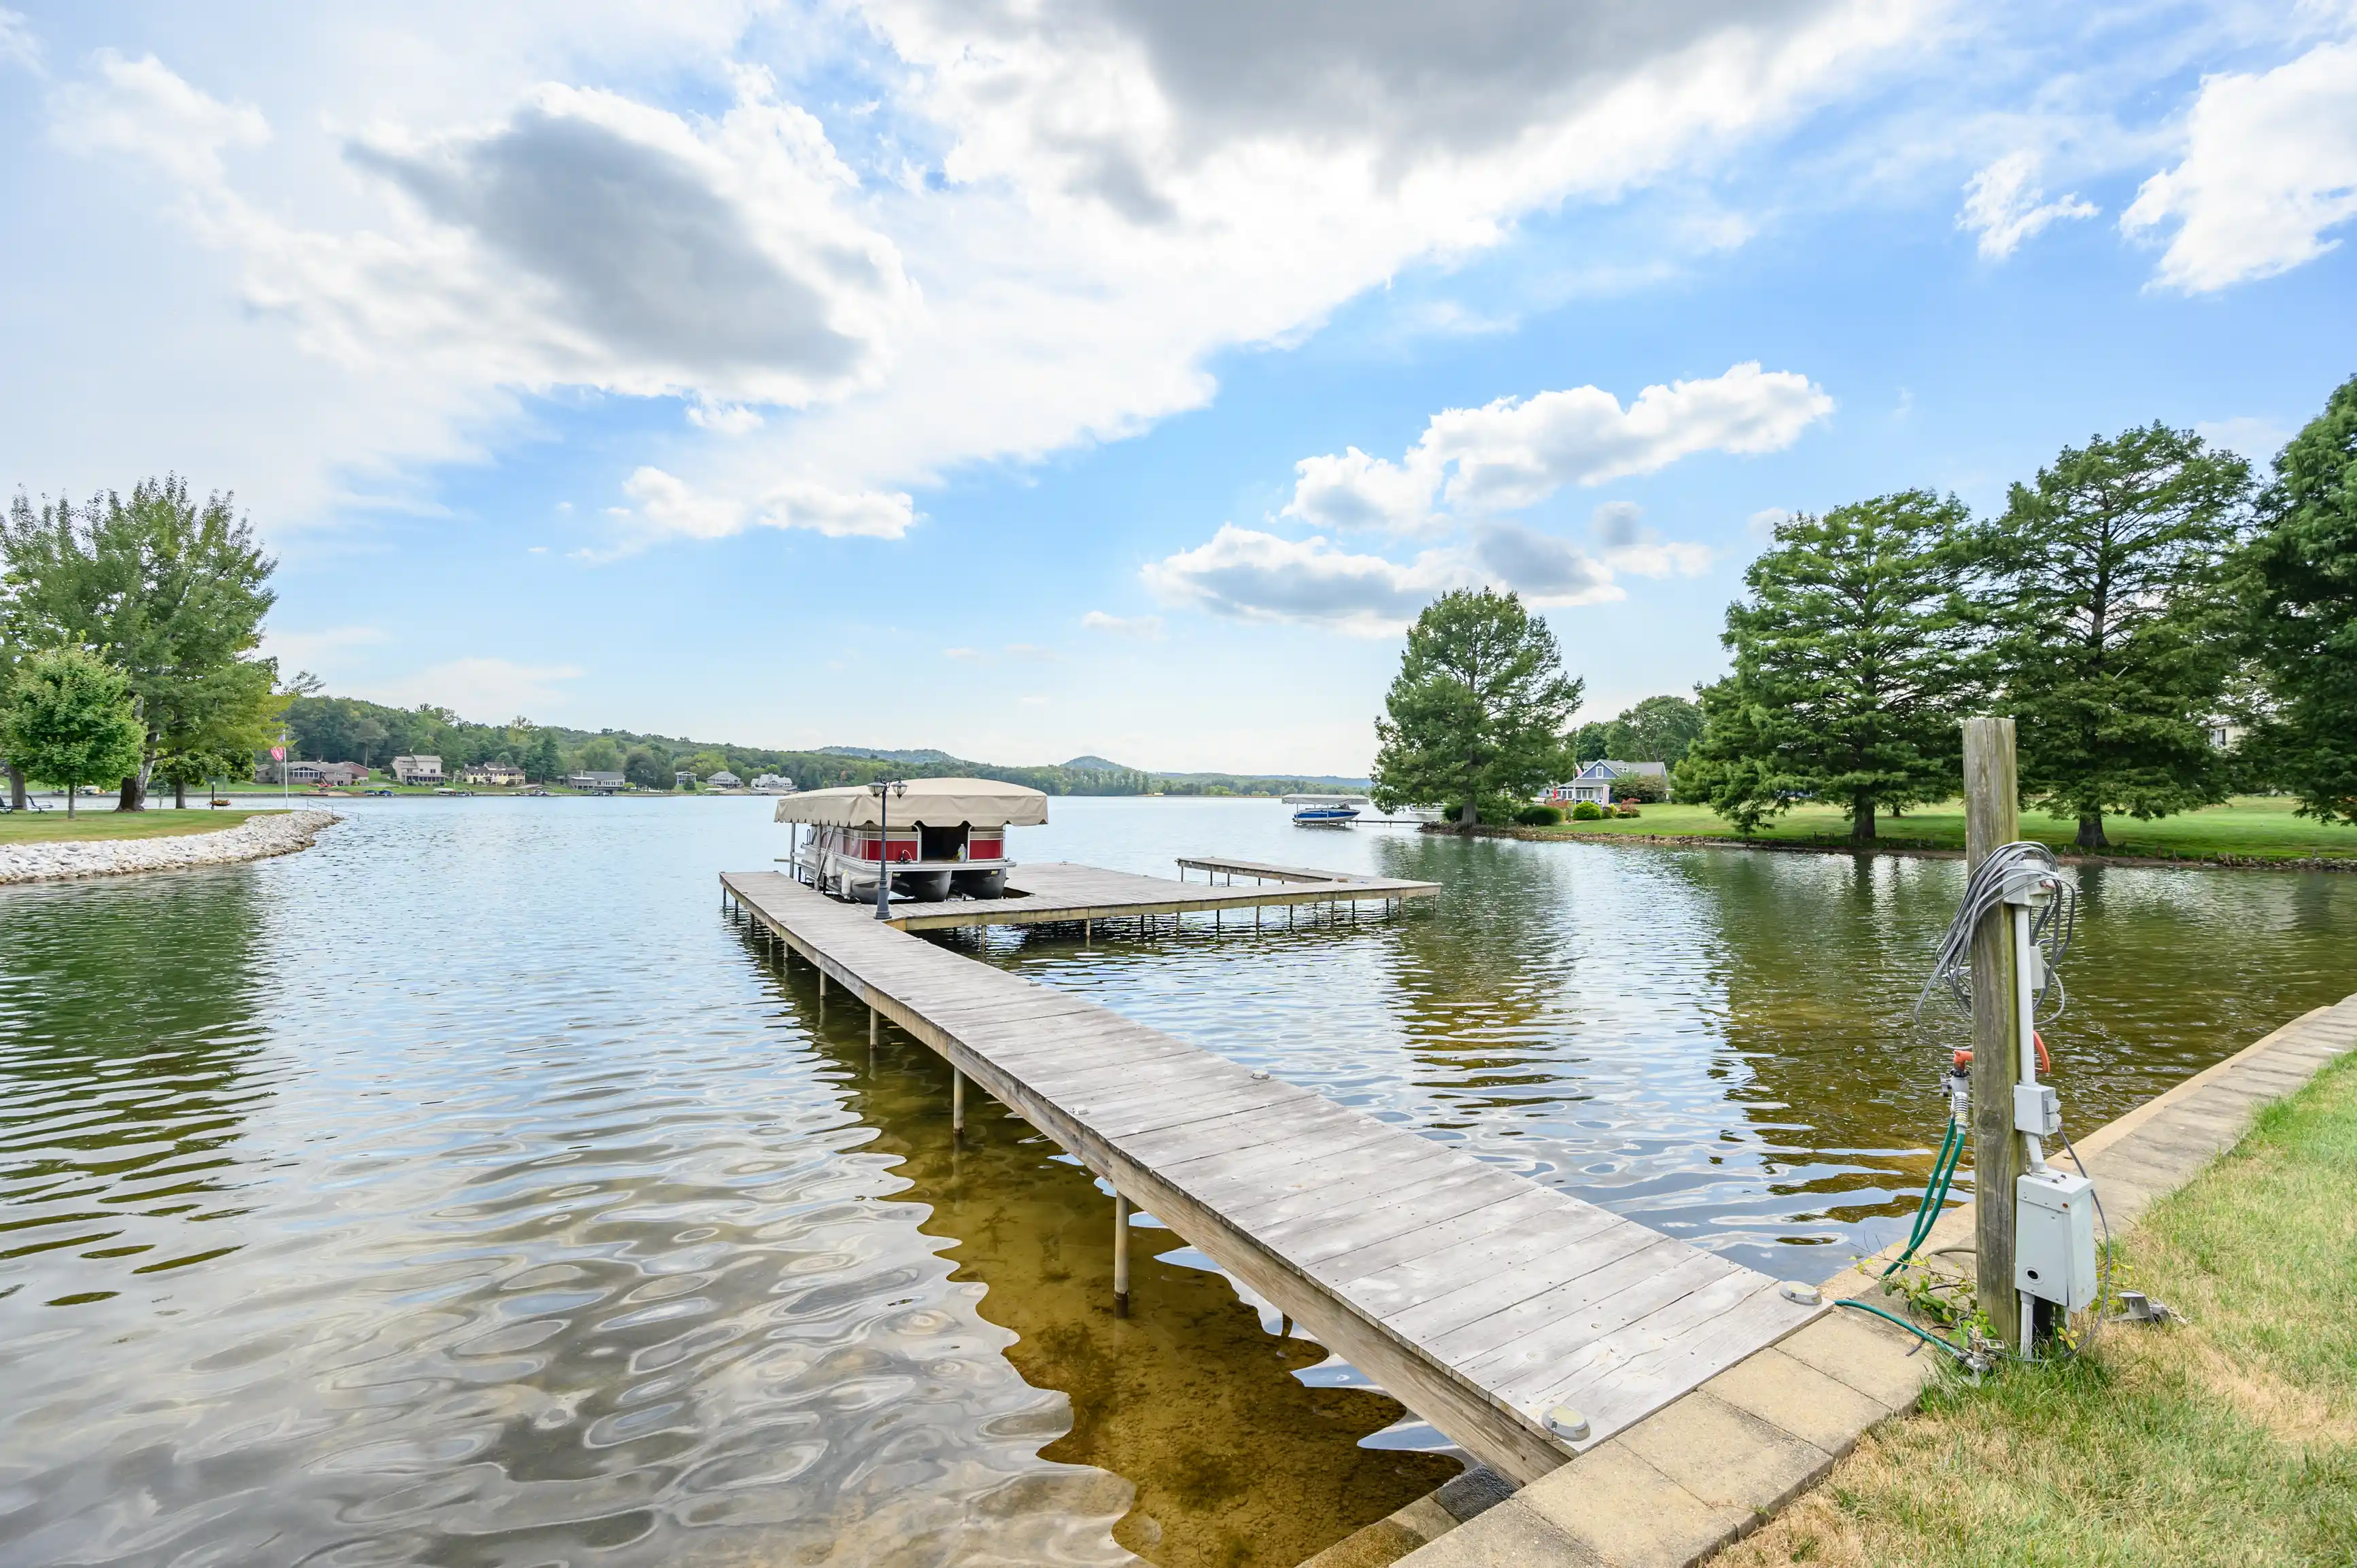 A tranquil lakeside scene with a wooden dock extending into the water, a covered pontoon boat moored at the end, surrounded by lush green trees under a partly cloudy sky.